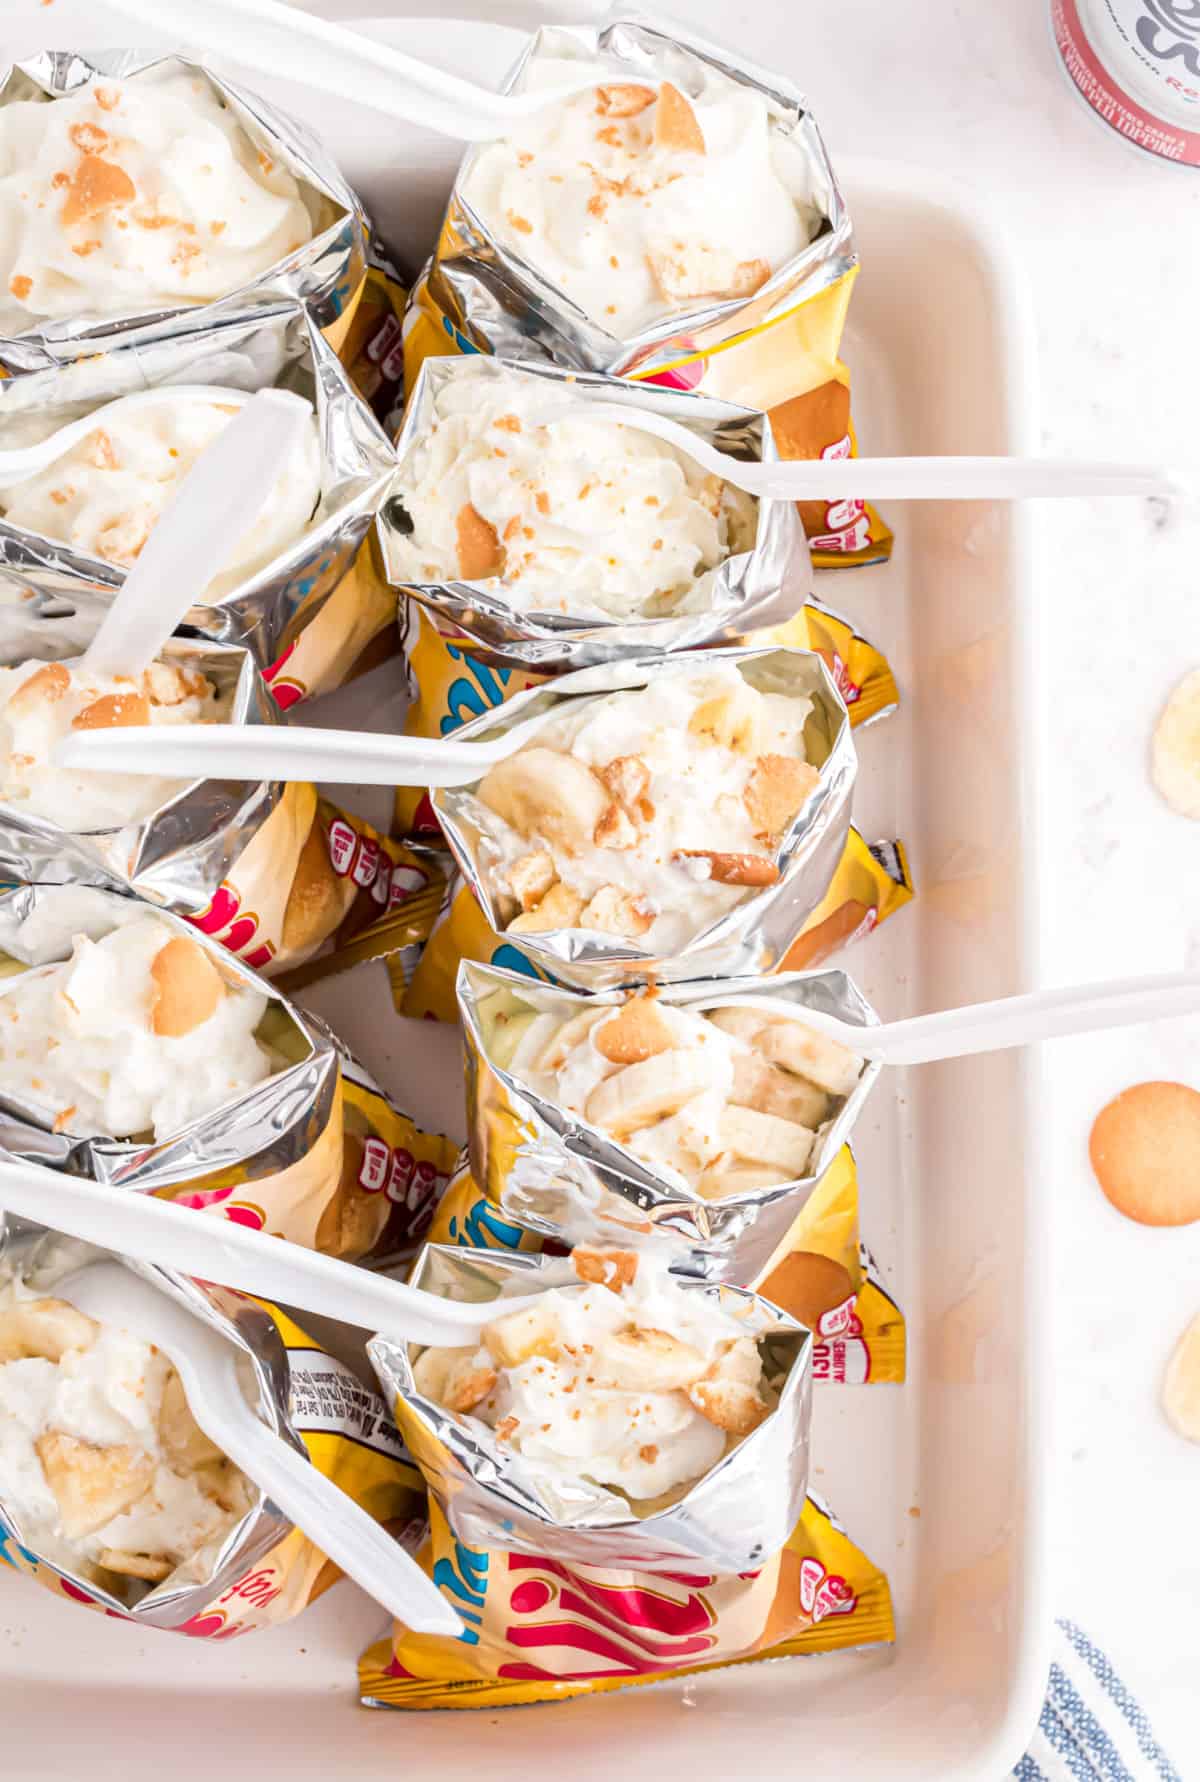 Banana pudding walking desserts assembled with plastic spoons.